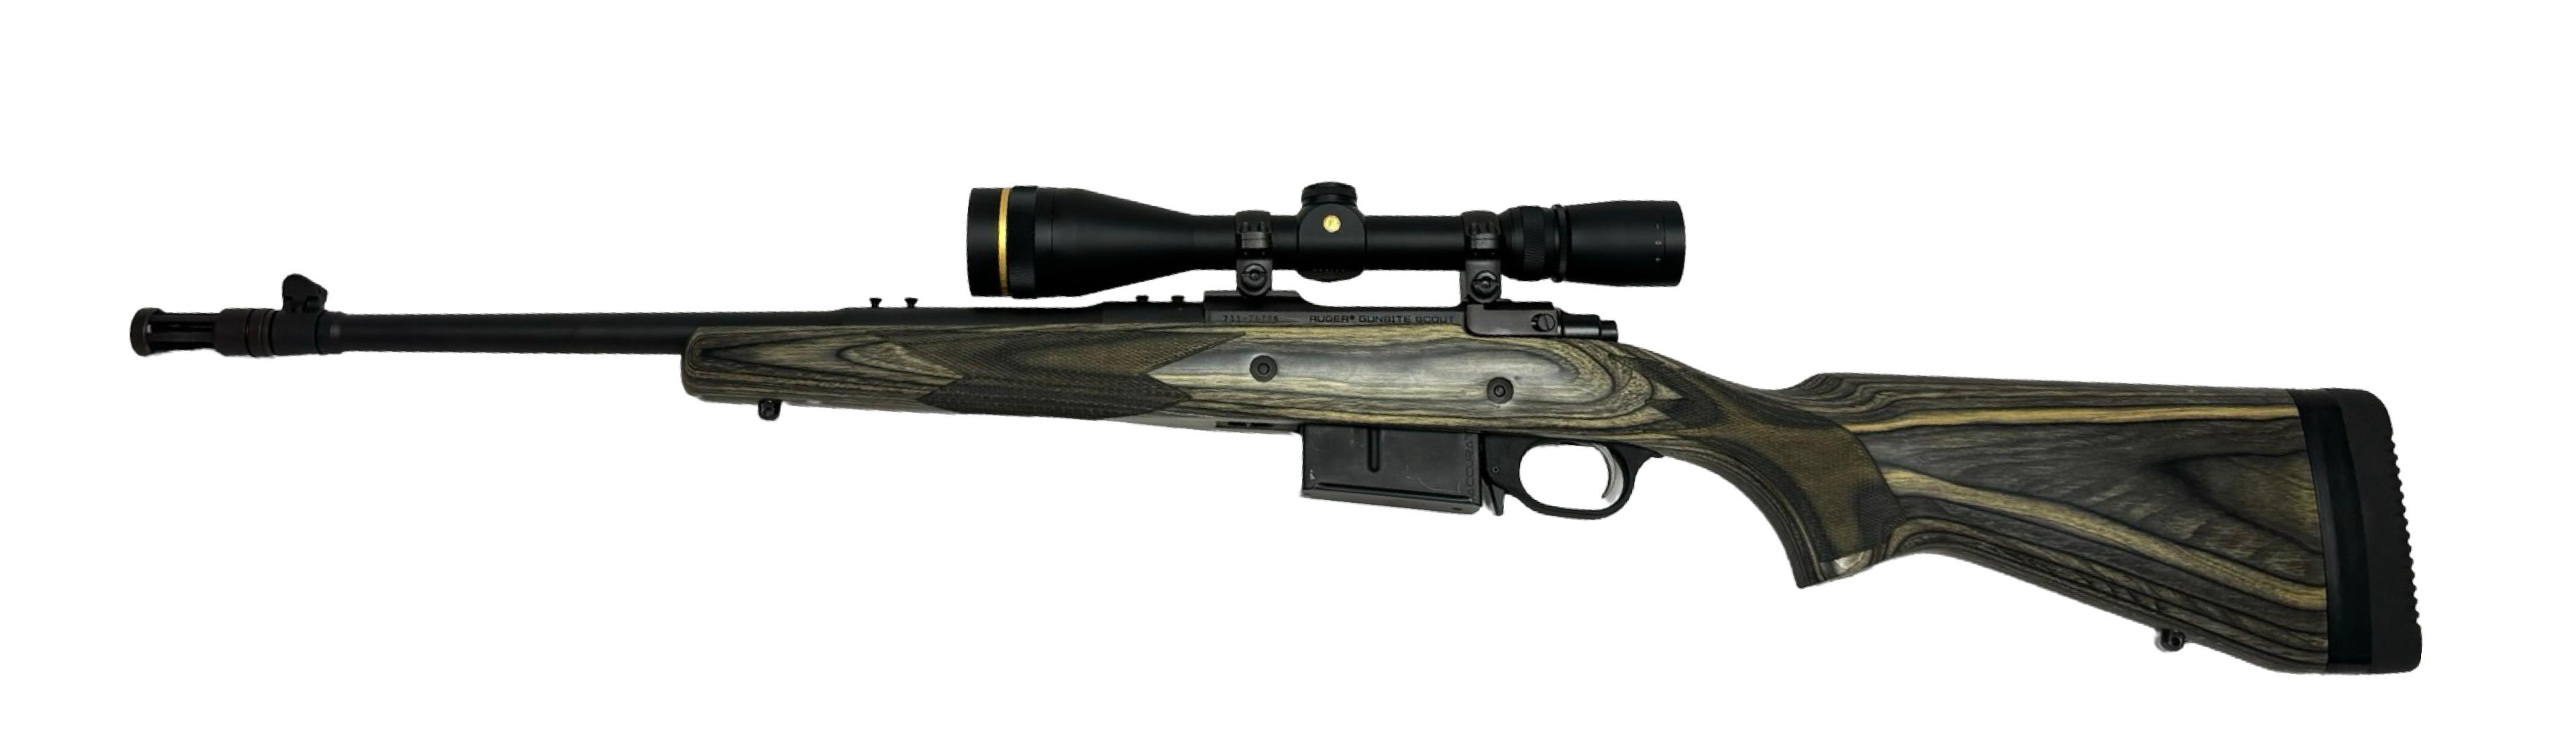 New Ruger Gunsite Scout .308 WIN. Compact Lightweight Hunting Rifle with Leupold Scope